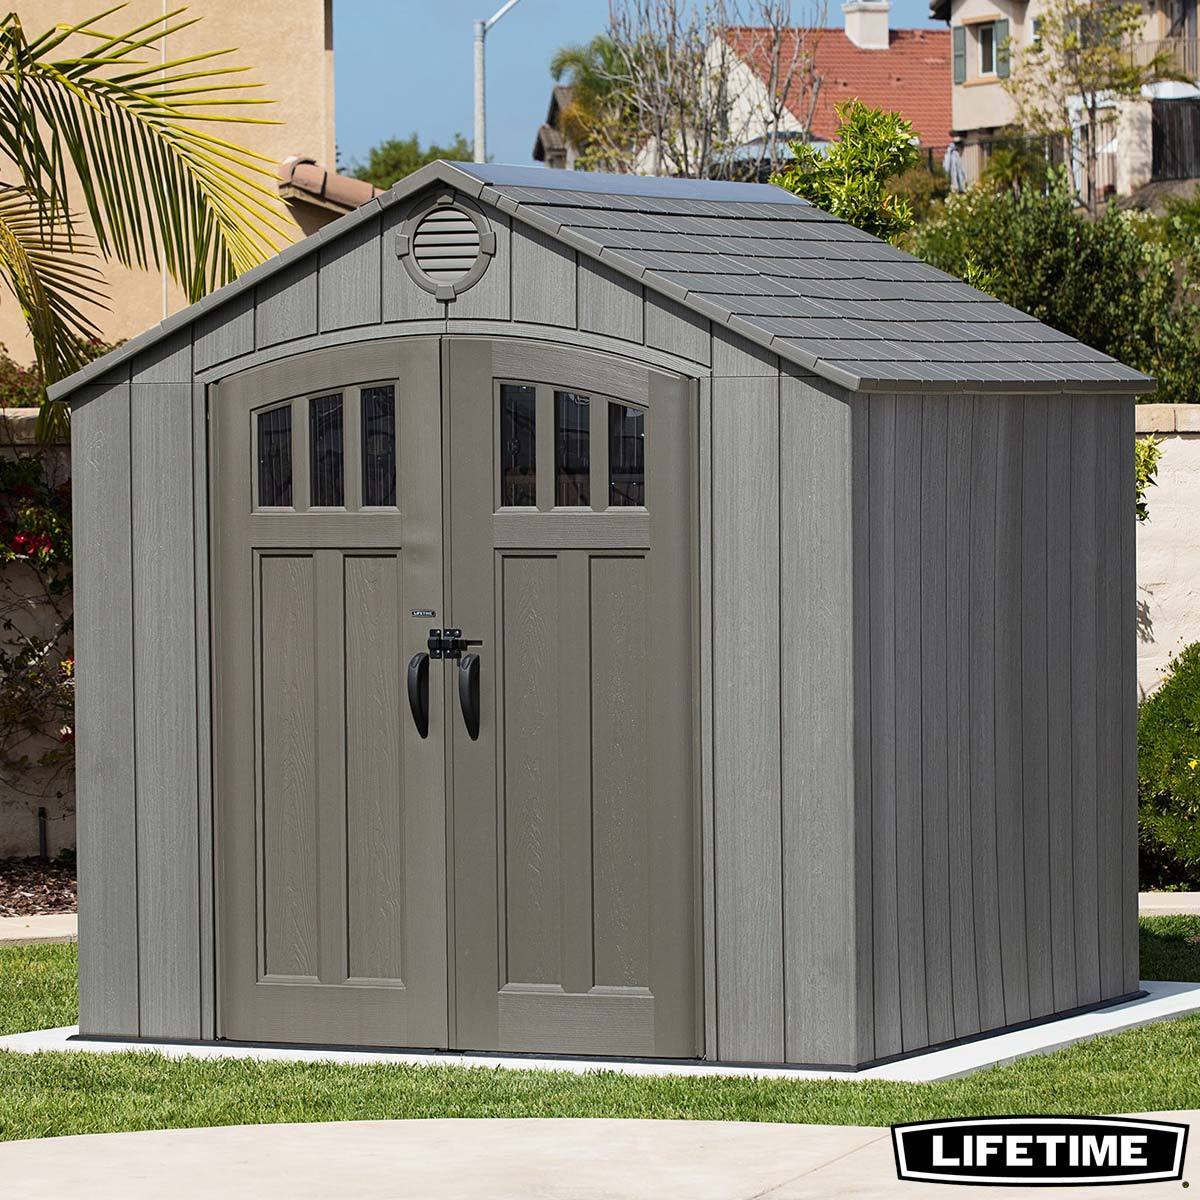 Lifetime 8ft X 7ft 5 2 4 X 2 3m Simulated Wood Look Storage